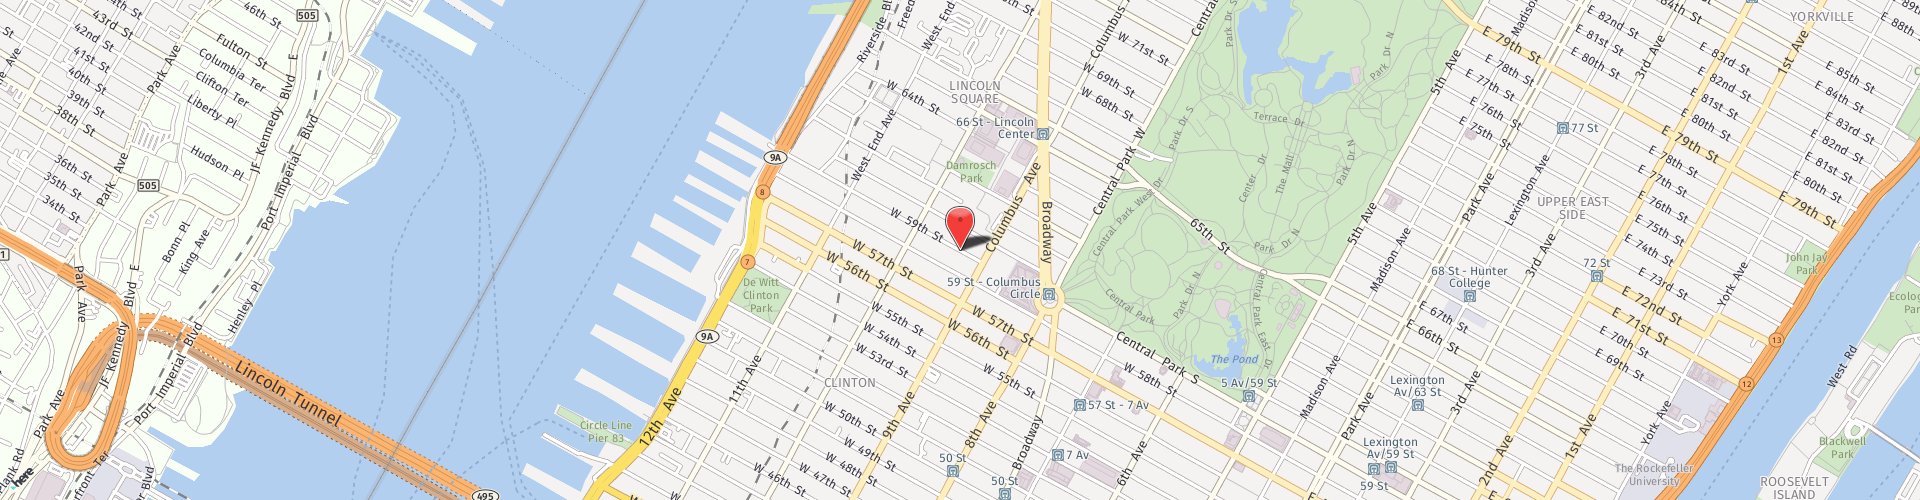 Location Map: 425 West 59th St. New York, NY 10019